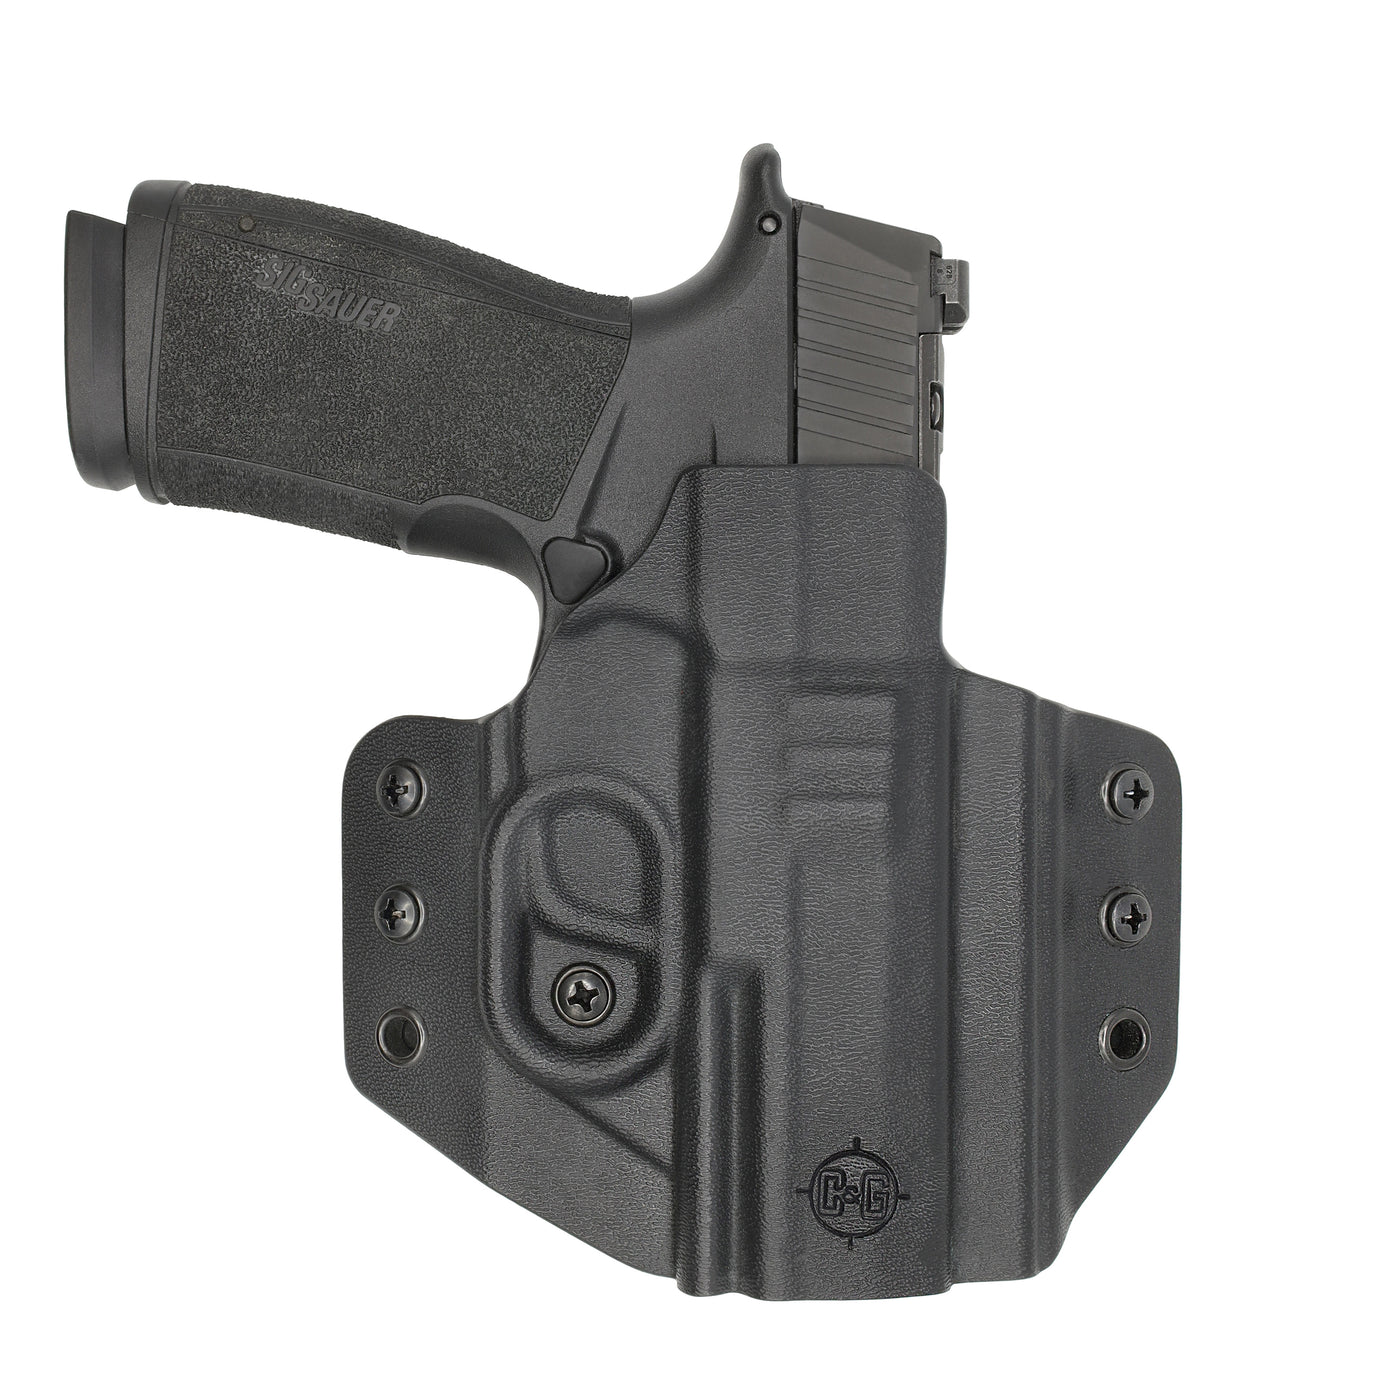 C&G Holsters custom OWB Covert SIG P365 XMacro in holstered position